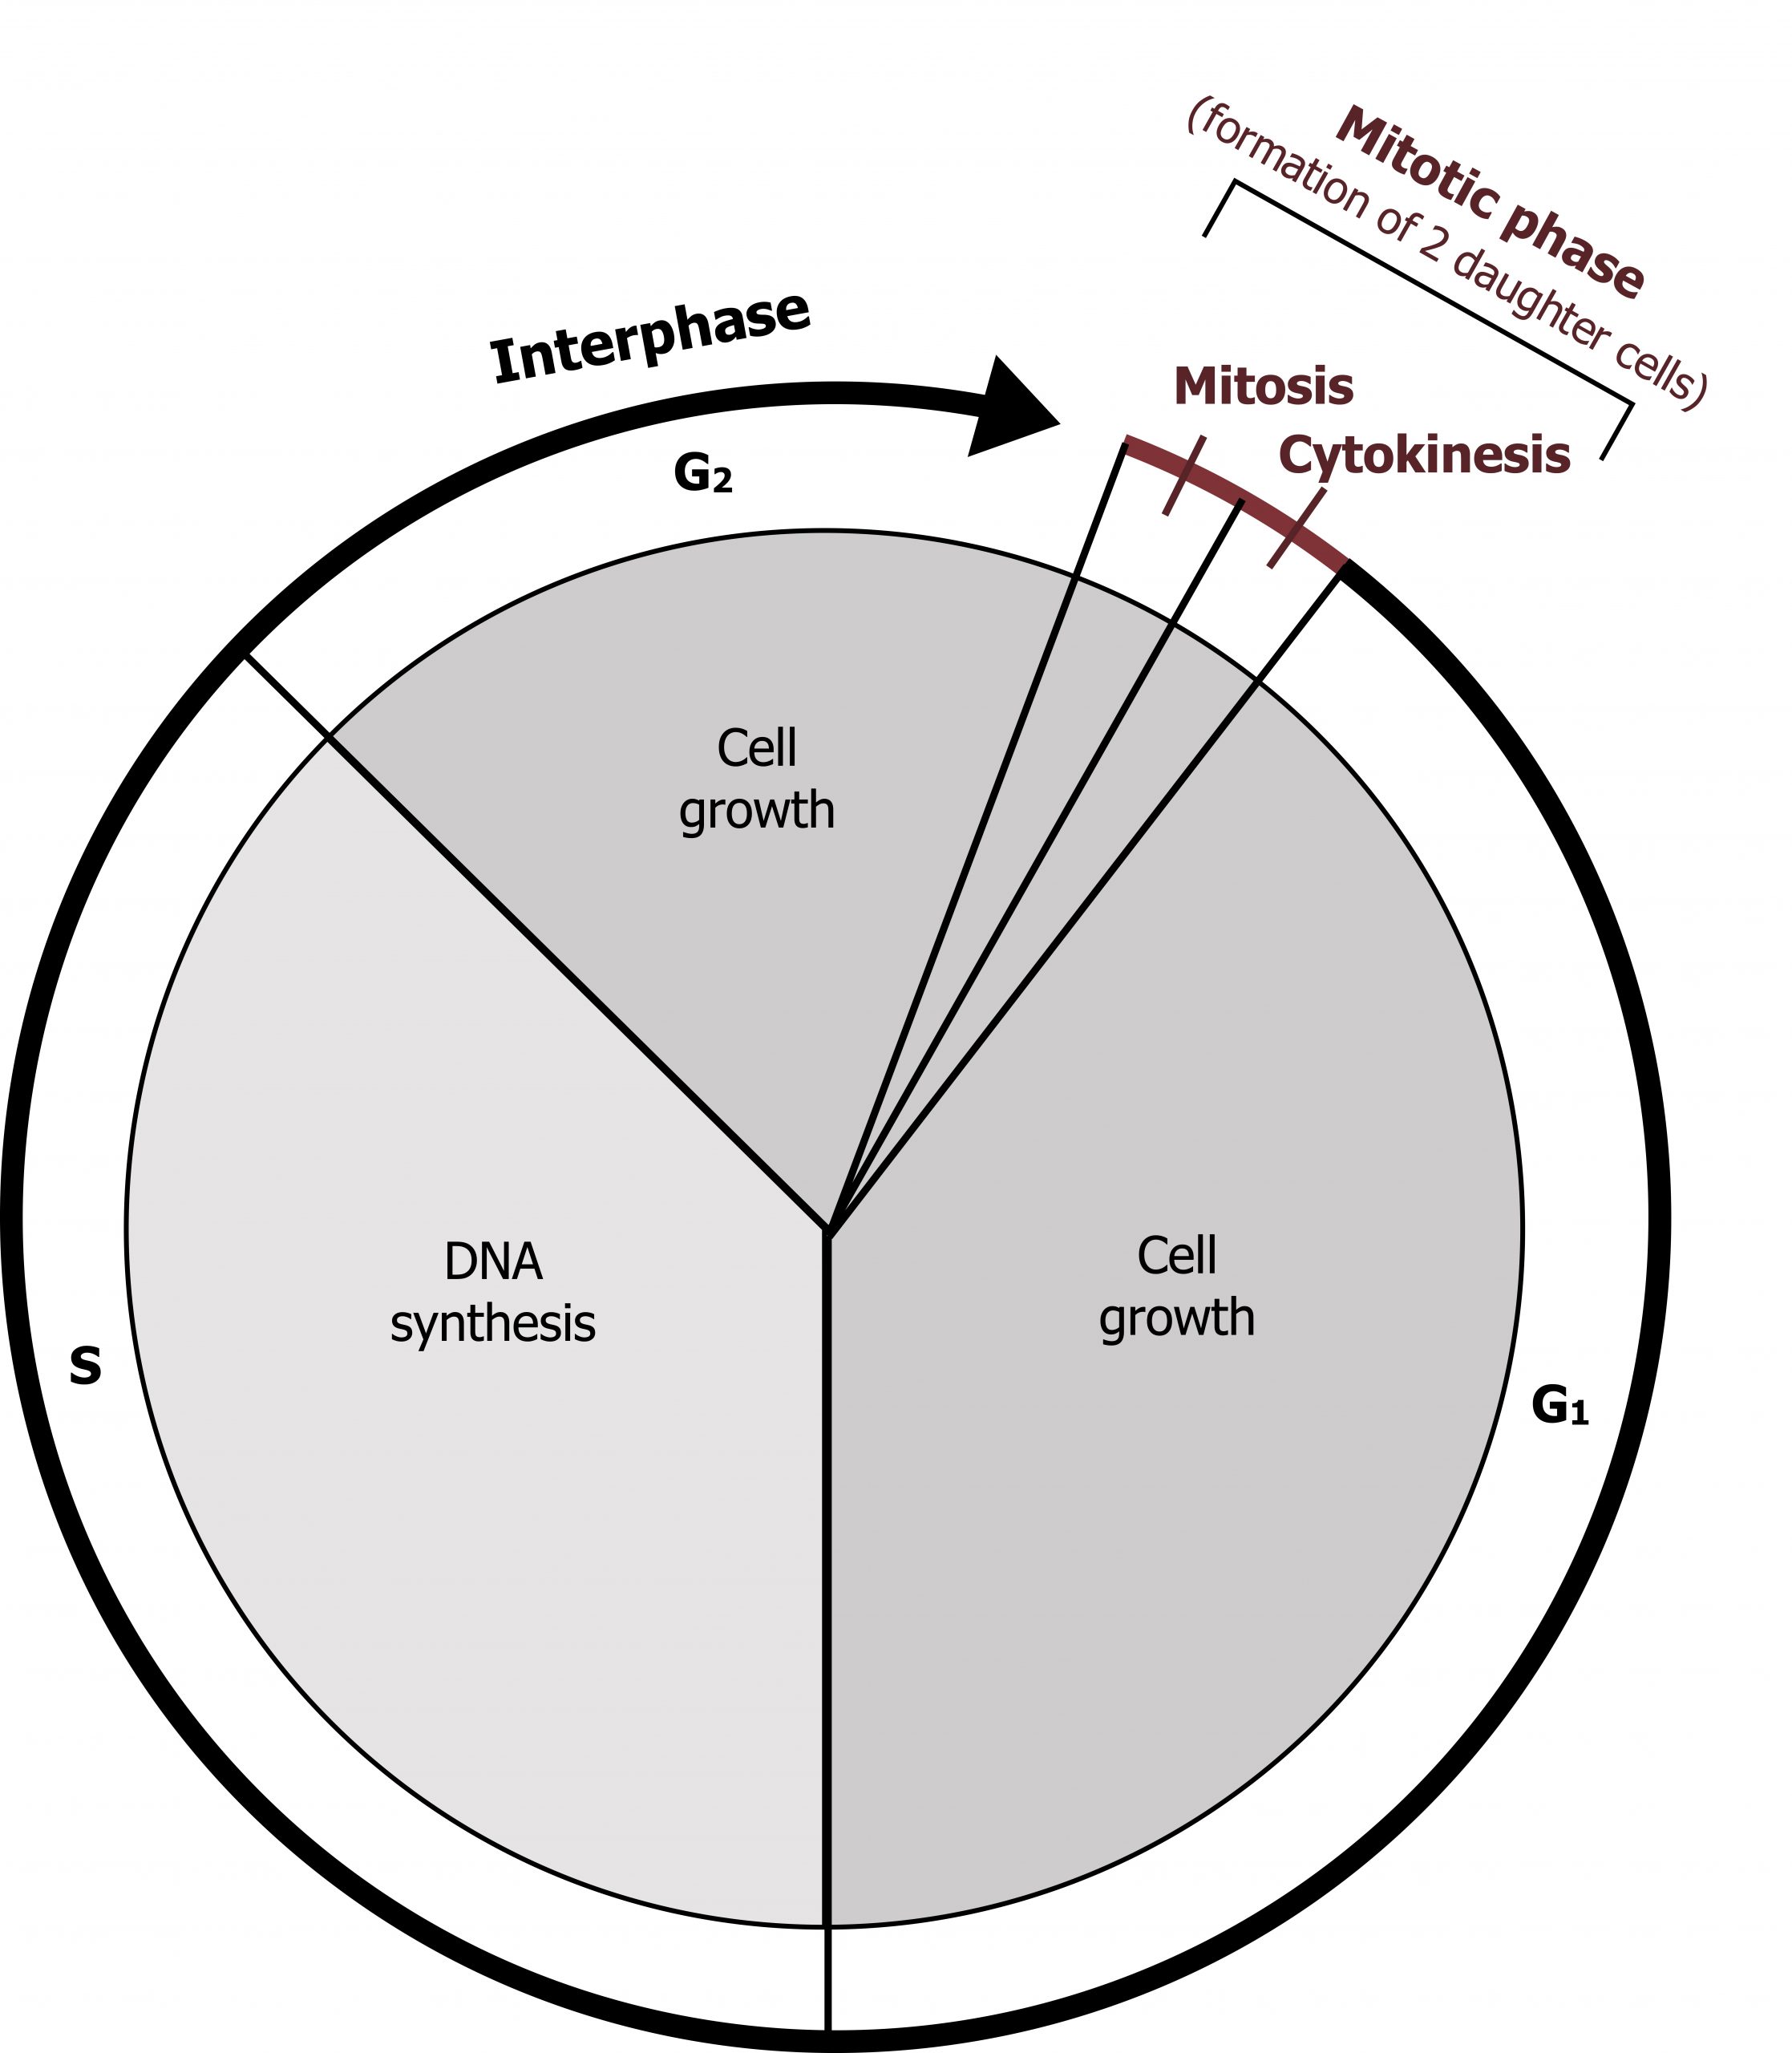 Cell cycle depicted in circular diagram starting with mitosis and cytokinesis which compose the mitotic phase (formation of 2 daughter cells). Next is G1 or cell growth, then S or DNA synthesis, then G2 or cell growth. G1, S, and G2 compose interphase.